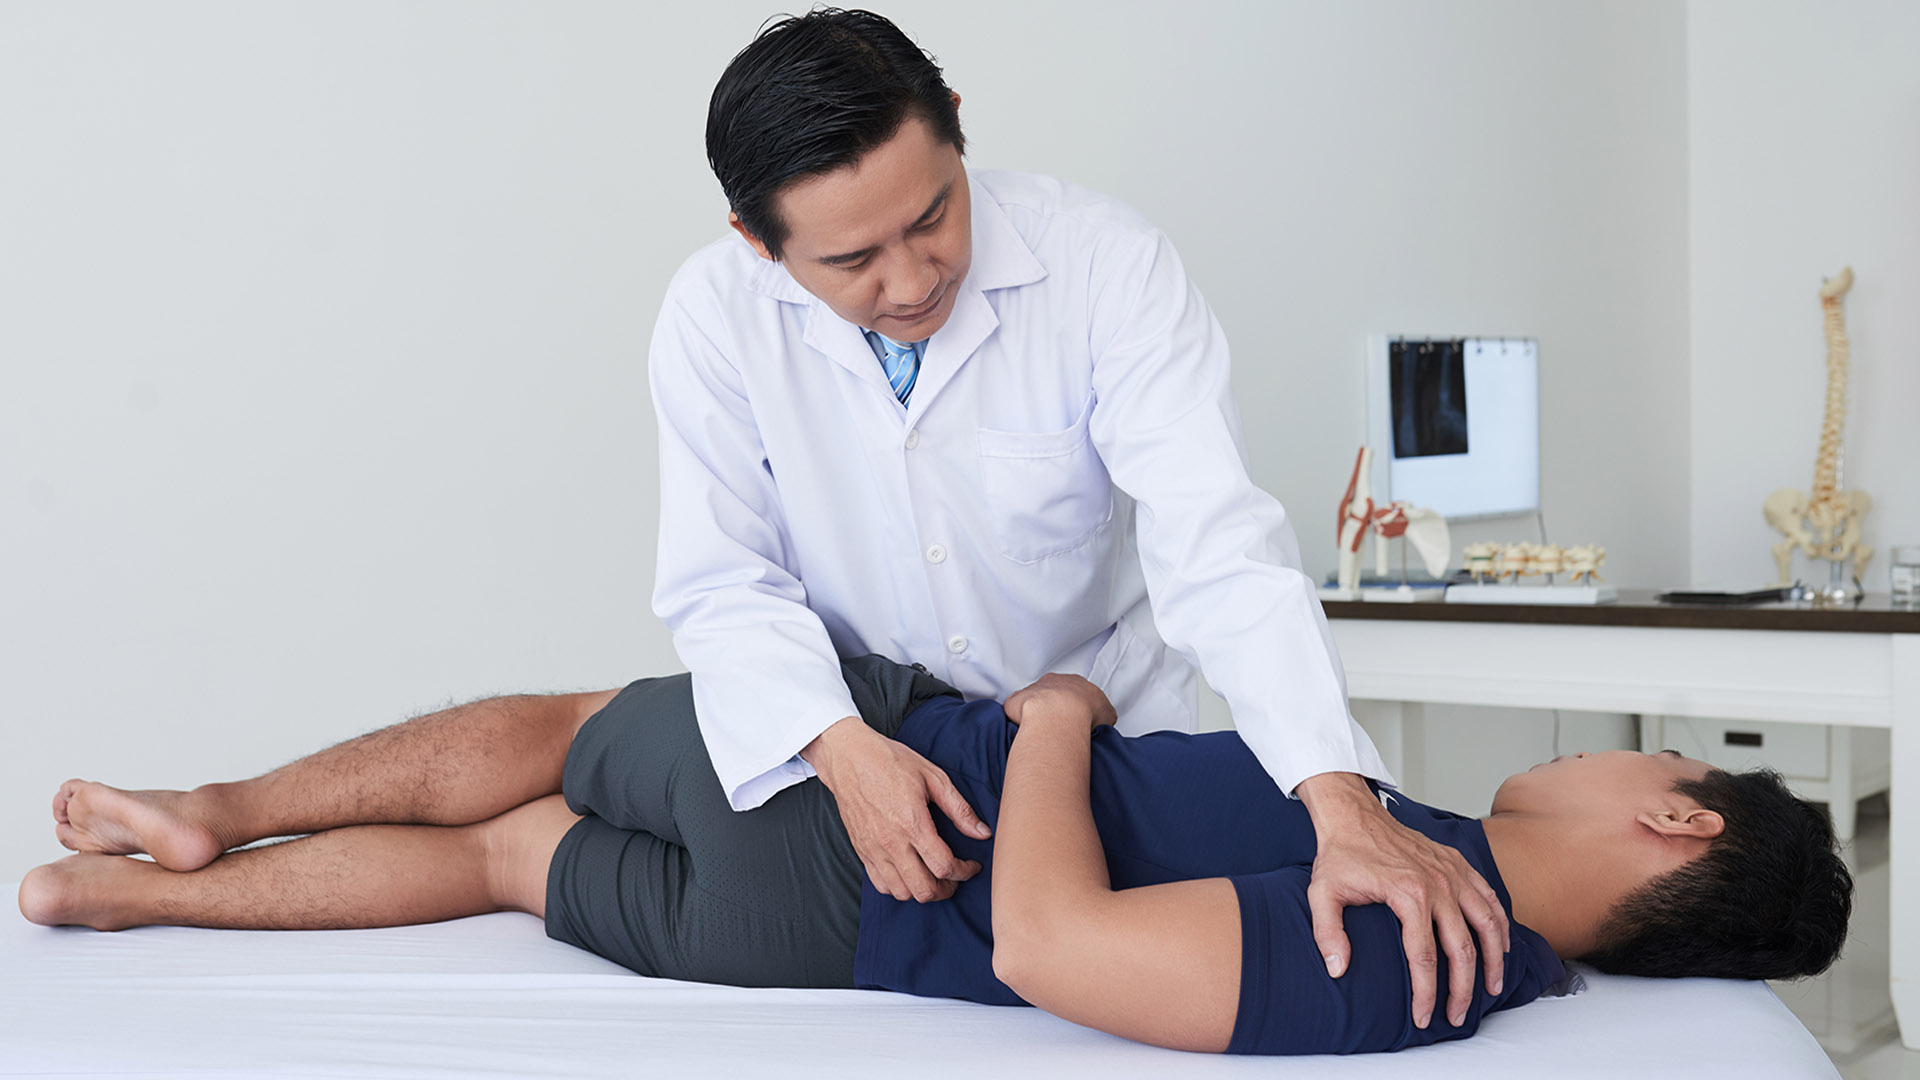 What You Should Know About Chiropractic Care